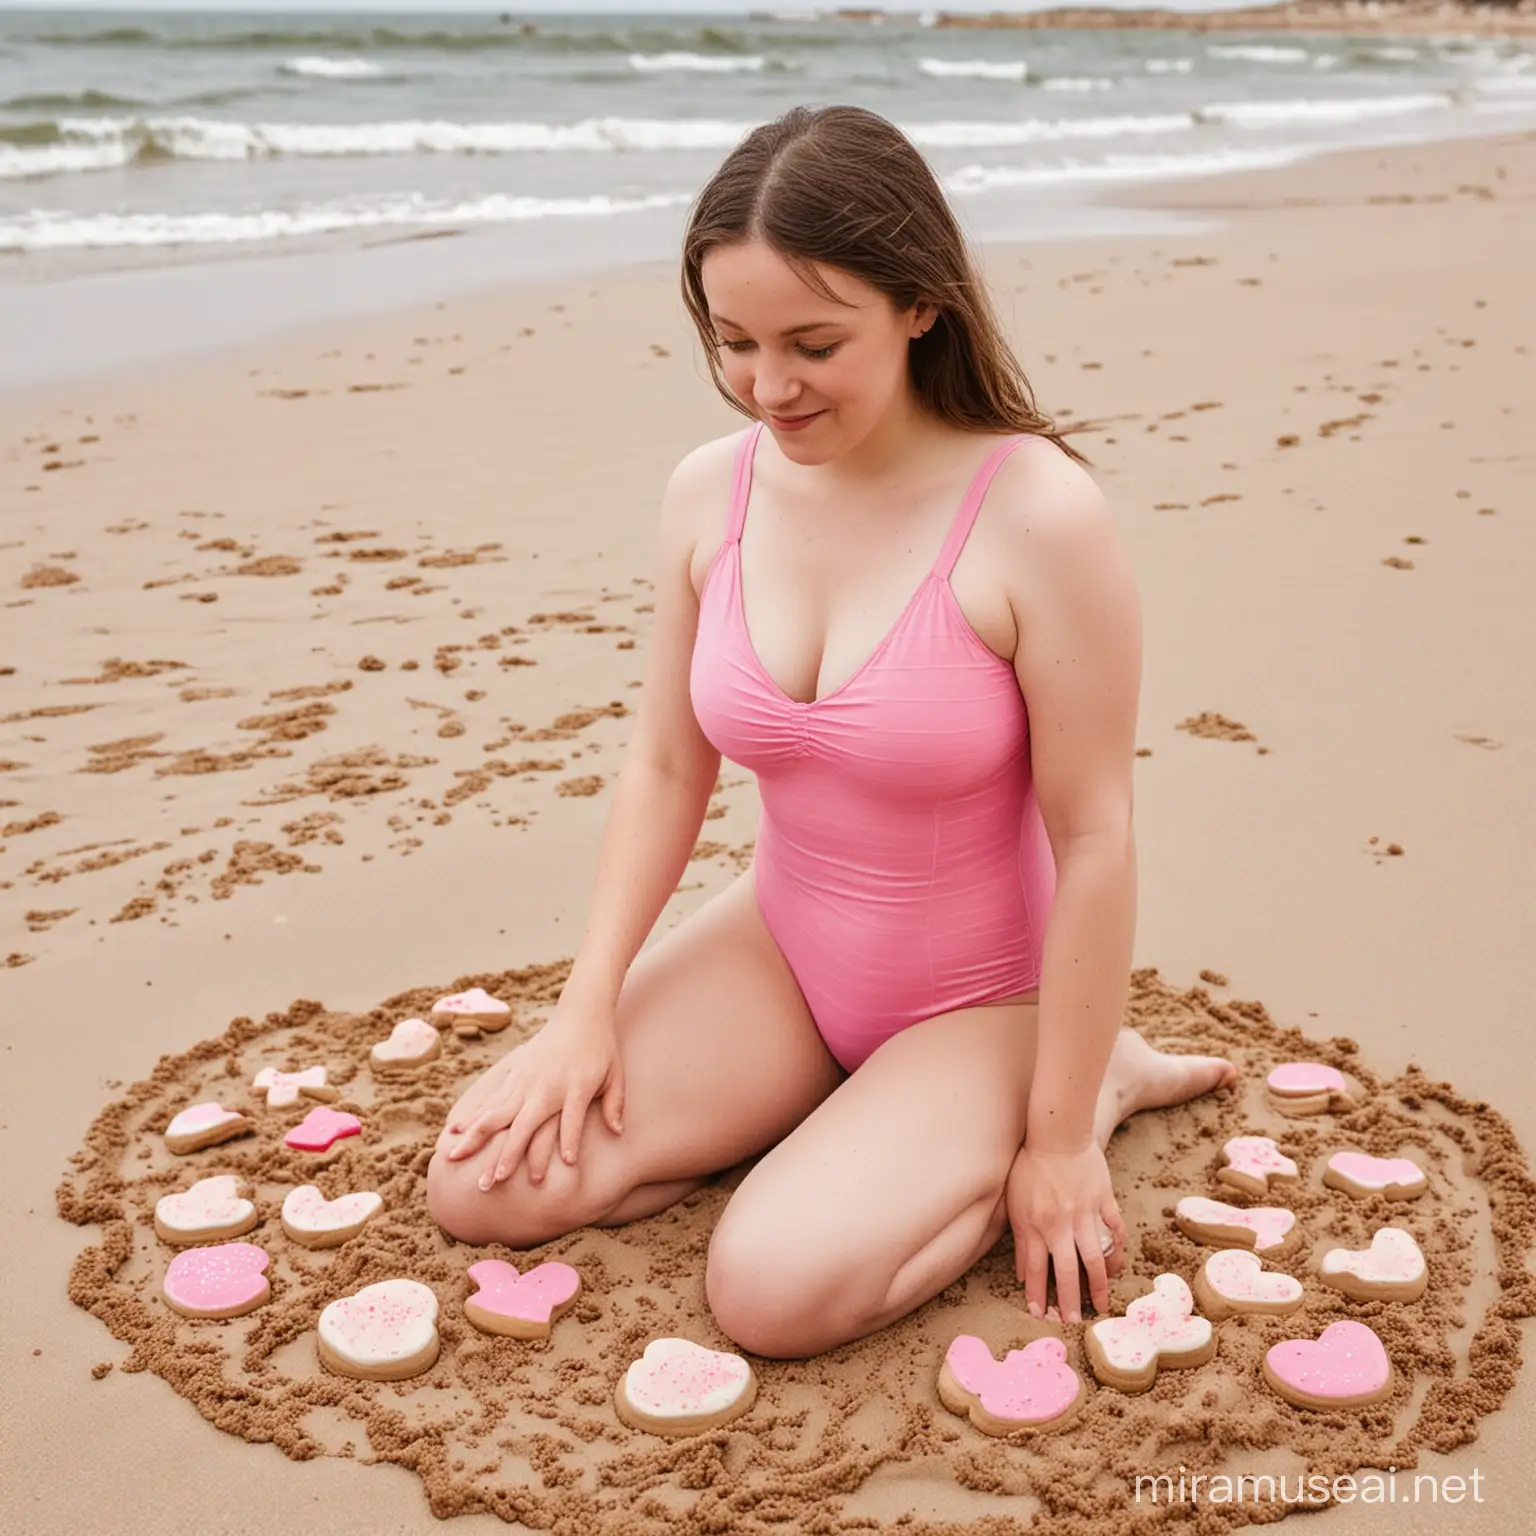 intellectually disabled down syndrome woman on the sandy beach makinng sand cakes, she is wearing a pink bathing suit